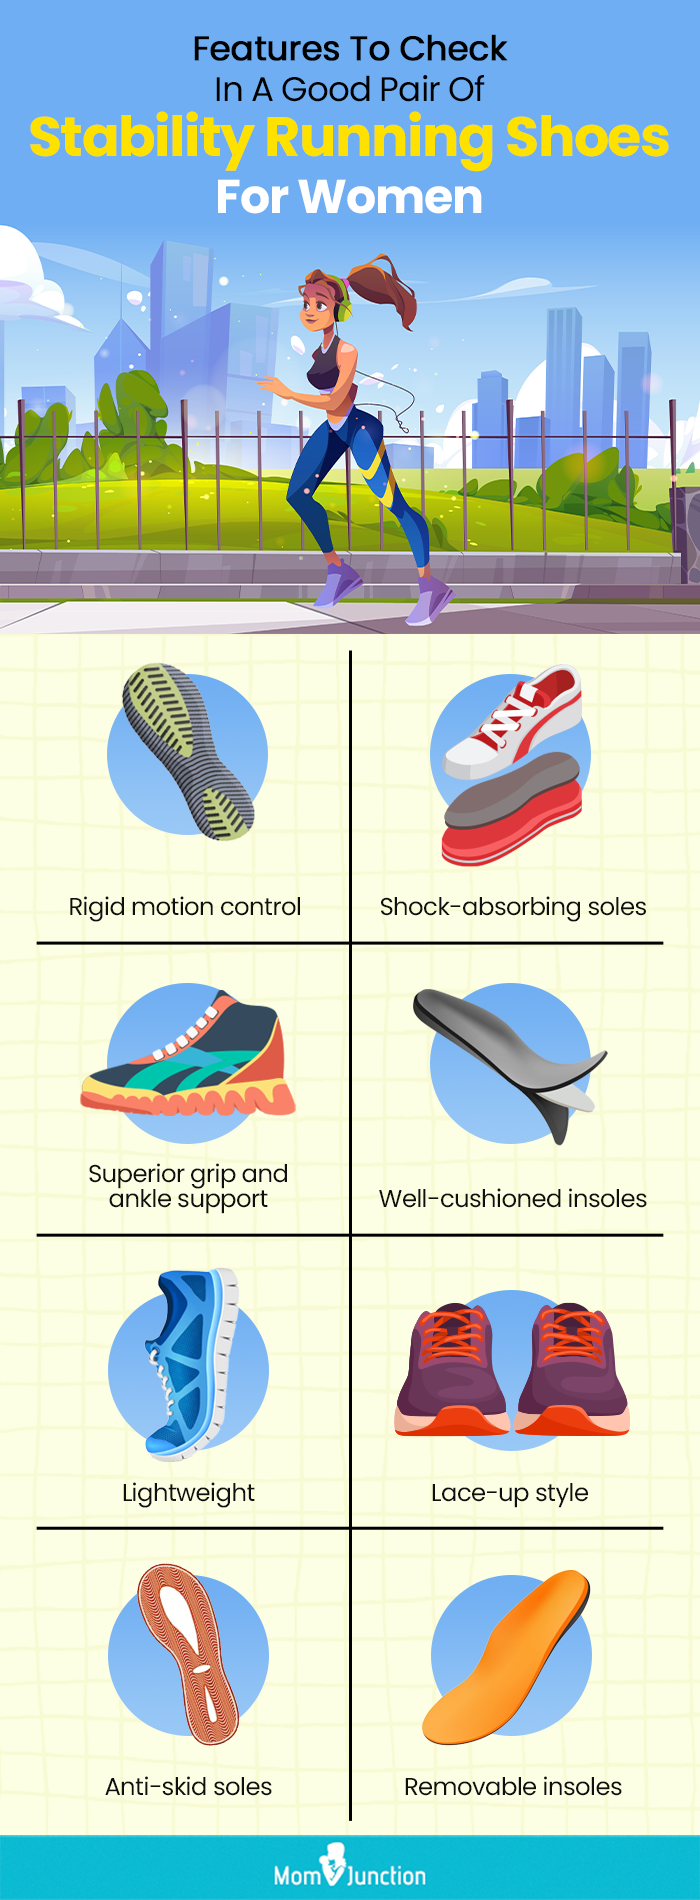 Features To Check In A Good Pair Of Stability Running Shoes For Women (infographic)